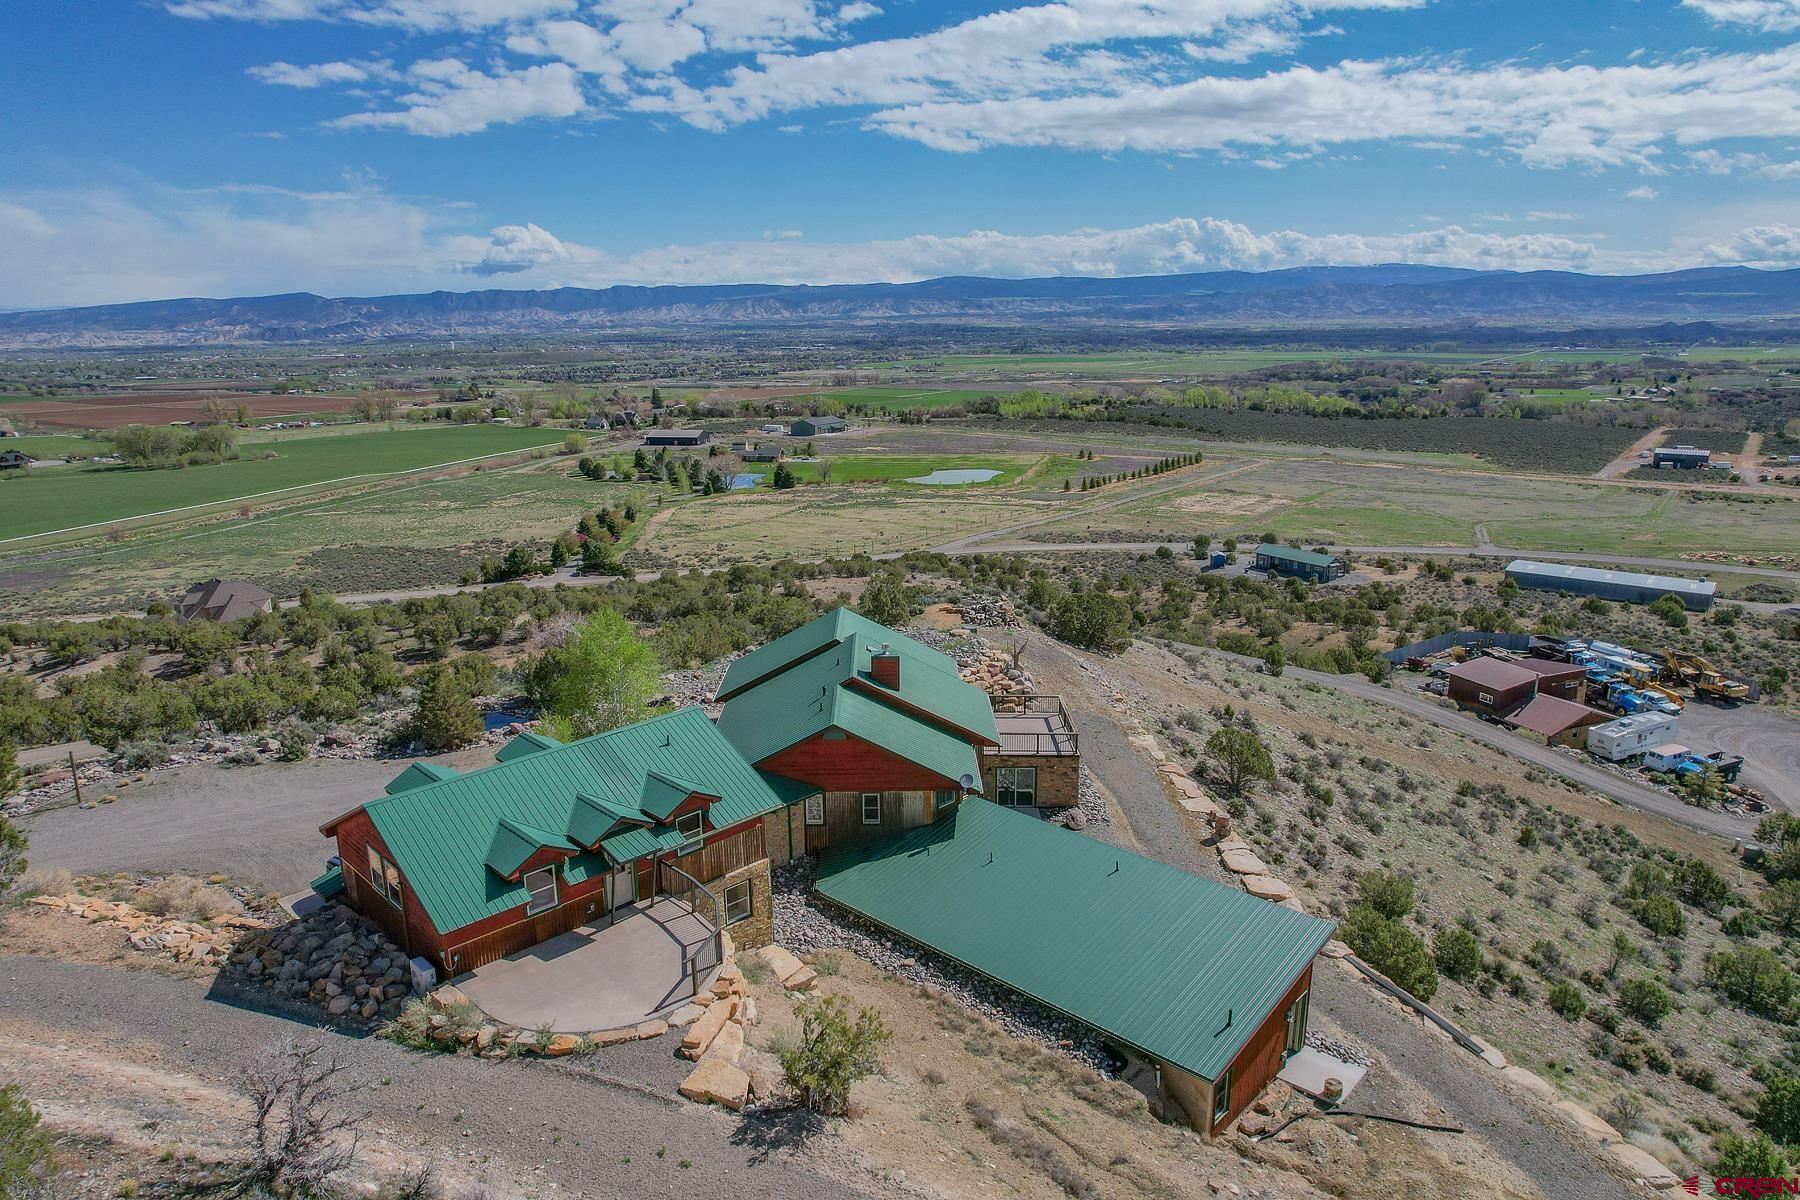 2022 Remodeled Home on 15 Acres For Sale, Montrose Located at the end of 6300 Rd in a serene and private area to the SW of Montrose, this 5,109 Sq Ft home sits on a gorgeous and picturesque view point with 15 acres. The home, named "Skyline Ranch", was remodeled in 2022 with high end finishes including engineered hardwood flooring, Knotty Alder trim and doors, all new appliances, as well new siding, windows, and roof to the homes most recent addition. There is no shortage of storage space, and plenty of options to furnish the 5,000 Sq Ft home as you please. The entire house is heated using in-floor radiant heat, and the master bedroom does have central air conditioning. The open concept living room / main level truly offers some of the best views with a generous amount of large windows. From the Grand Mesa, The Cimarron Mountains, San Juans Mountains, and Downtown Montrose, it really is spectacular and yet only 10 minutes from Main Street and Montrose / Telluride airport. The property is mostly dry, but does have mature vegetation, a small pond that wildlife use, Aspen trees at the front entrance, and a lovely water feature that welcomes you to the home. The house also overlooks a private airstrip with improved lots available for the aviation enthusiasts. There are also neighboring parcels for sale from the same owner.   Borders BLM (GMU 62), Airpark Community (7CO2), Large Workshop, Fiber Internet  Being one of the original homes in this small airpark neighbor (Ranger Ranch Airstrip), it has some of the best access to BLM public lands and the opportunity to own property on the actual airstrip. It is a dirt runway, perfect for larger tire backcountry planes, and STOL pilots. There are several hangars built next to the runway and aviation enthusiasts nearby. The 15 acre property does have a large heated shop that was built in 2000 and has concrete floors and plumbed for a bathroom. There is an ample amount of space and parking on the property for recreational toys, RV, or Camper. The home does have a brand new septic system adequate for a 5+ bedroom home, well water that is clean and pumps strong, as well Elevate fiber internet. There is strong cell reception and LTE service.   Montrose, Colorado - Hiking, Biking, Fishing, Rafting, Big Game Hunting, Skiing, Snowmobiling Montrose Colorado is a growing Western Colorado town known for its easy location, warmer climates, and abundant recreation. Just down the road is Ridgway and Ouray, Colorado - known for their famous hot springs, mountain climbing, and small mining town charm. A little farther down the road is Telluride & Telluride Mountain Resort for the summer and winter extreme sport athletes. Montrose, Ridgway, Ouray, and Telluride also have fine cuisine, local bakeries and coffee shops, and plenty of community events year-round. Moab, Utah is also a commonly visited town that is a scenic drive west and within 3 hours. The Grand Mesa is just north of Montrose and one of the largest flat top mountains in the world, offering over 300 lakes and ponds. Montrose is surrounded by ample opportunities for off-roading, dirt biking, mountain biking, rafting, hiking, fly-fishing, and snowmobiling. This property in-particular has jeep trails, single track, and rock crawling within a half mile and accessible from your driveway. This home is set up perfectly for the recreational type, aviation enthusiast, big game hunter, or someone who just wants the best views you can find within commuting distance to Montrose or Ridgeway, Colorado.